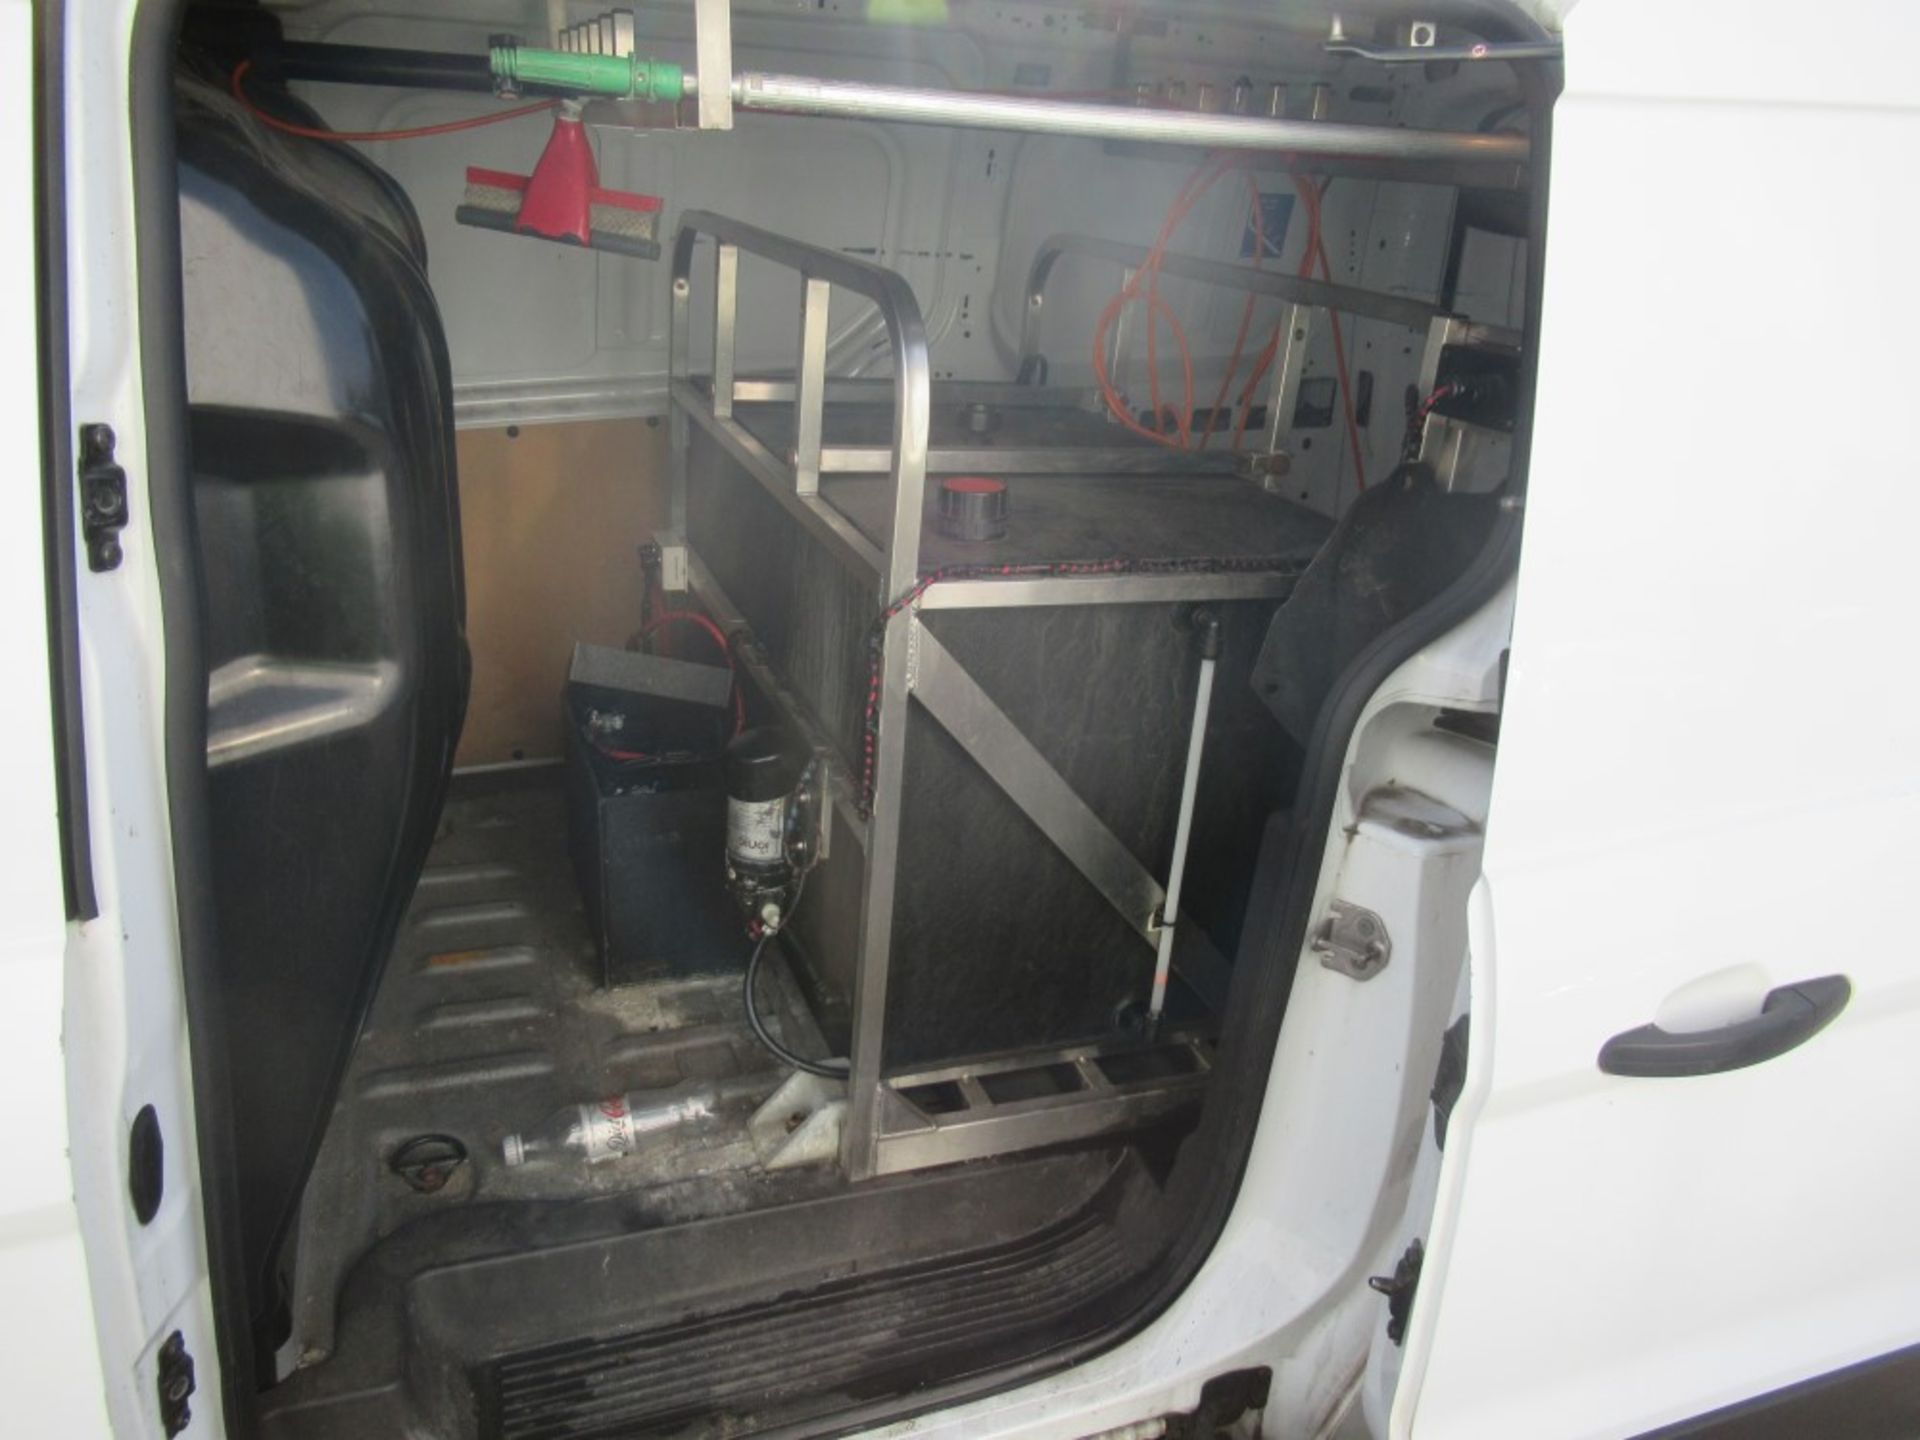 64 reg FORD TRANSIT CONNECT 210 ECO-TECH C/W REACH & WASH SYSTEM IN REAR, 1ST REG 09/14, 120053M - Image 6 of 7